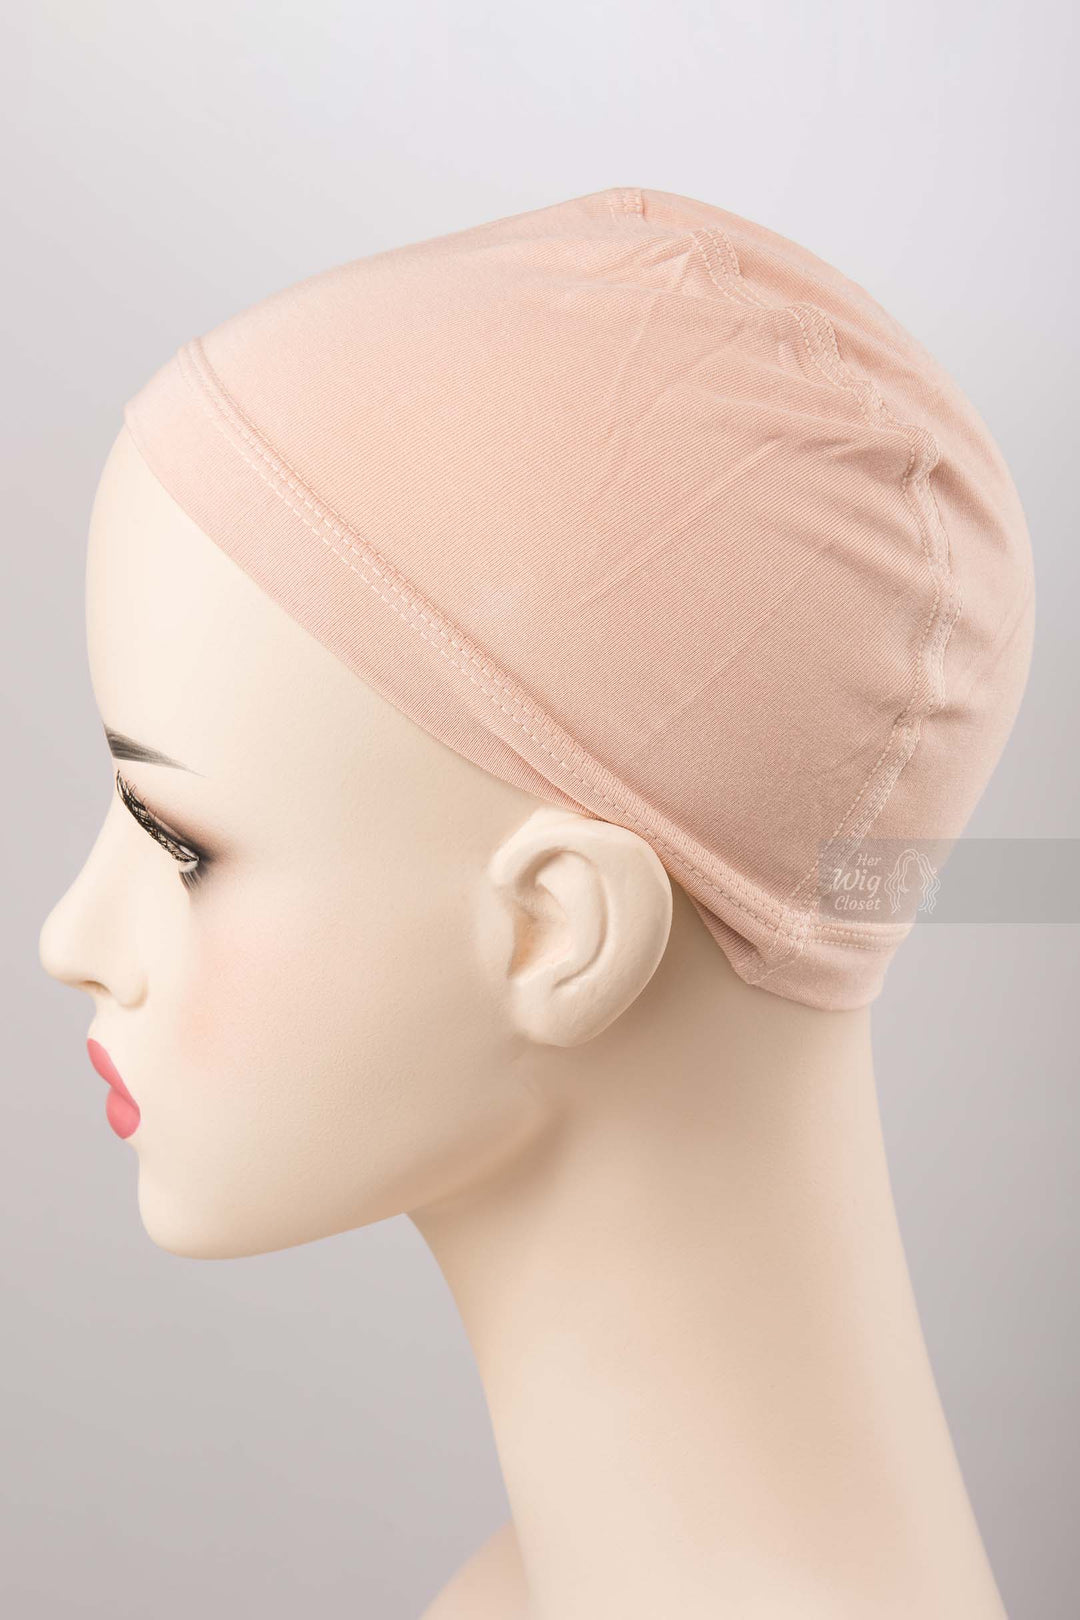 Soft Bamboo Wig Cap Comfortable Hair Loss Solution for Chemo and Alopecia - Premium Quality Bamboo Wig Liner